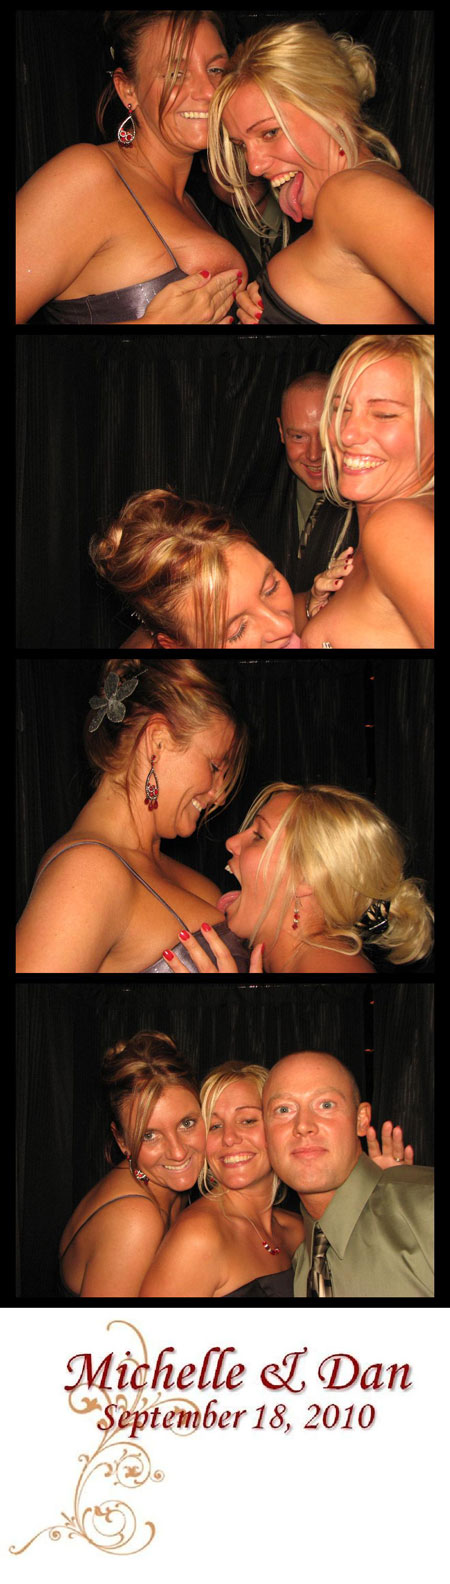 Girls Licking each others boobs in a Photobooth